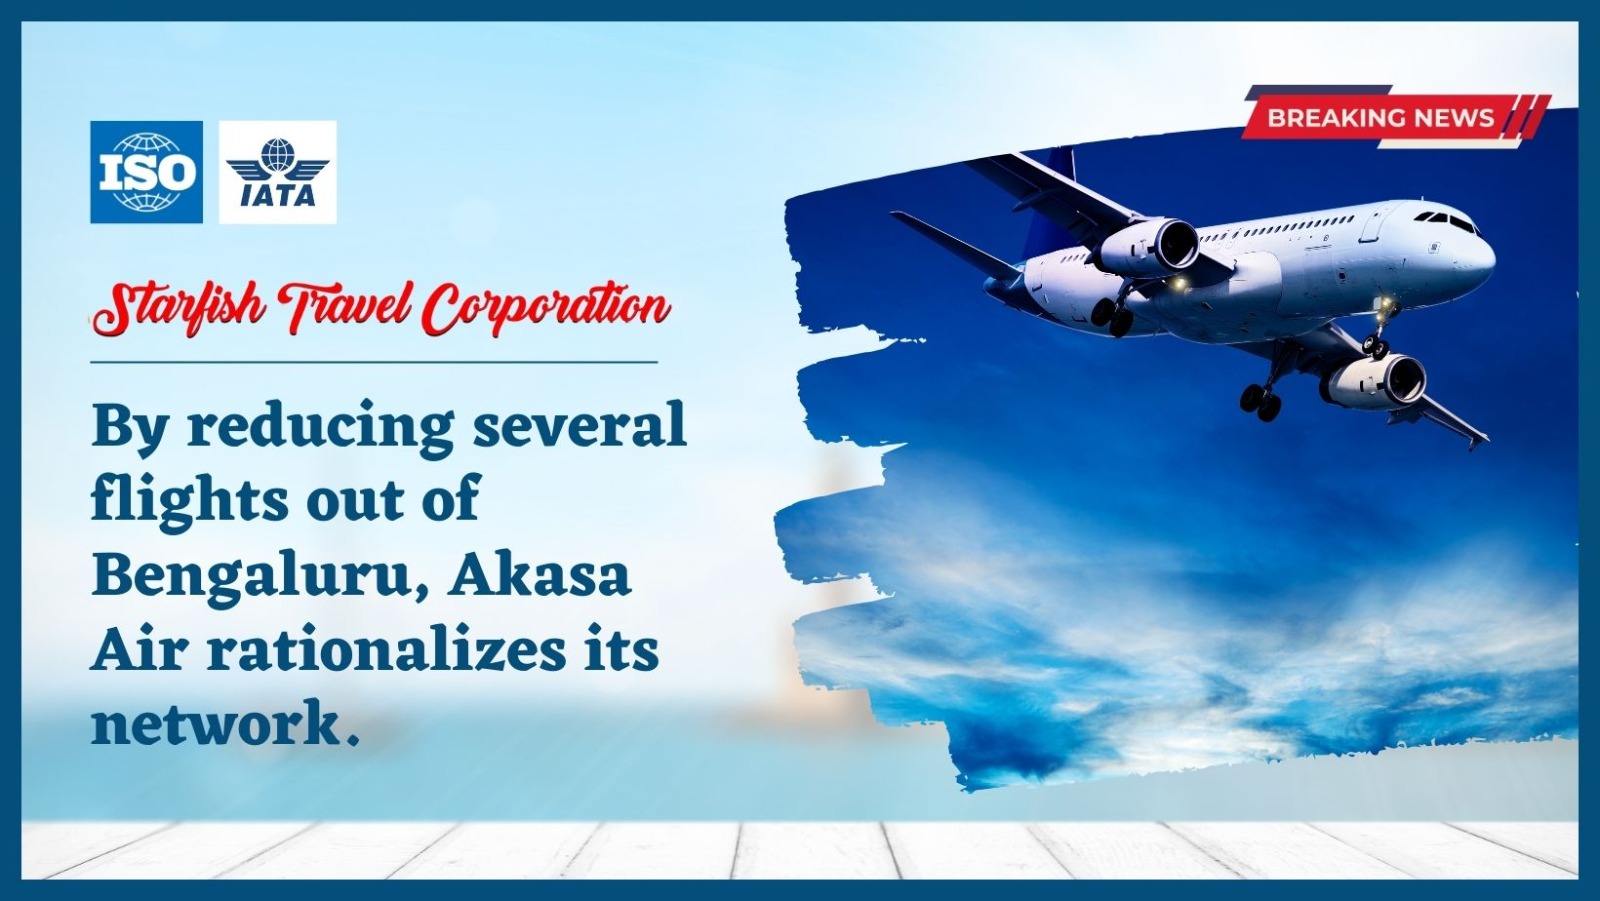 By reducing several flights out of Bengaluru, Akasa Air rationalizes its network.